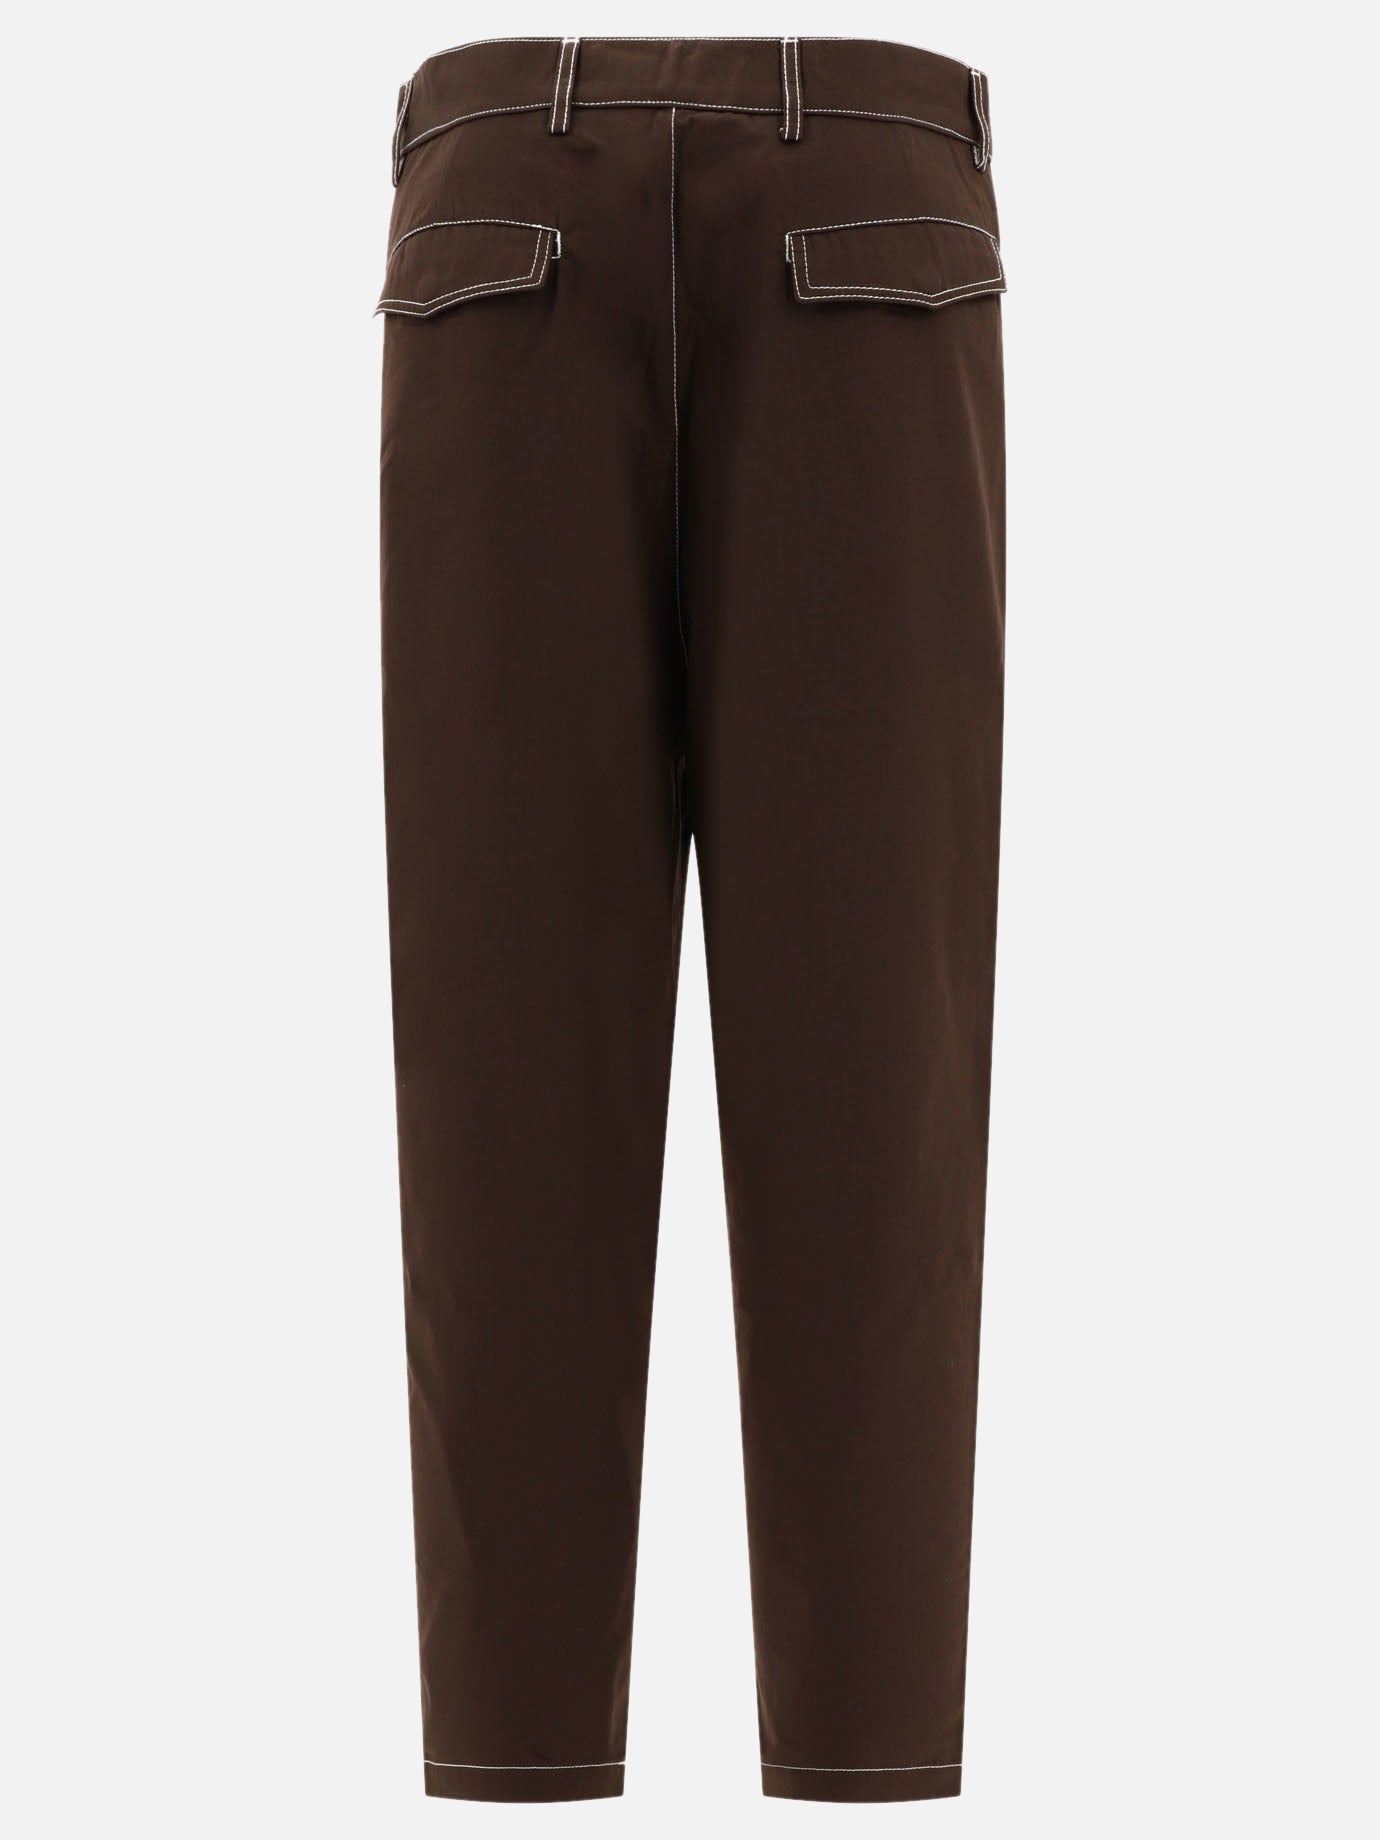 "Shajarat Contrast Stitched" trousers